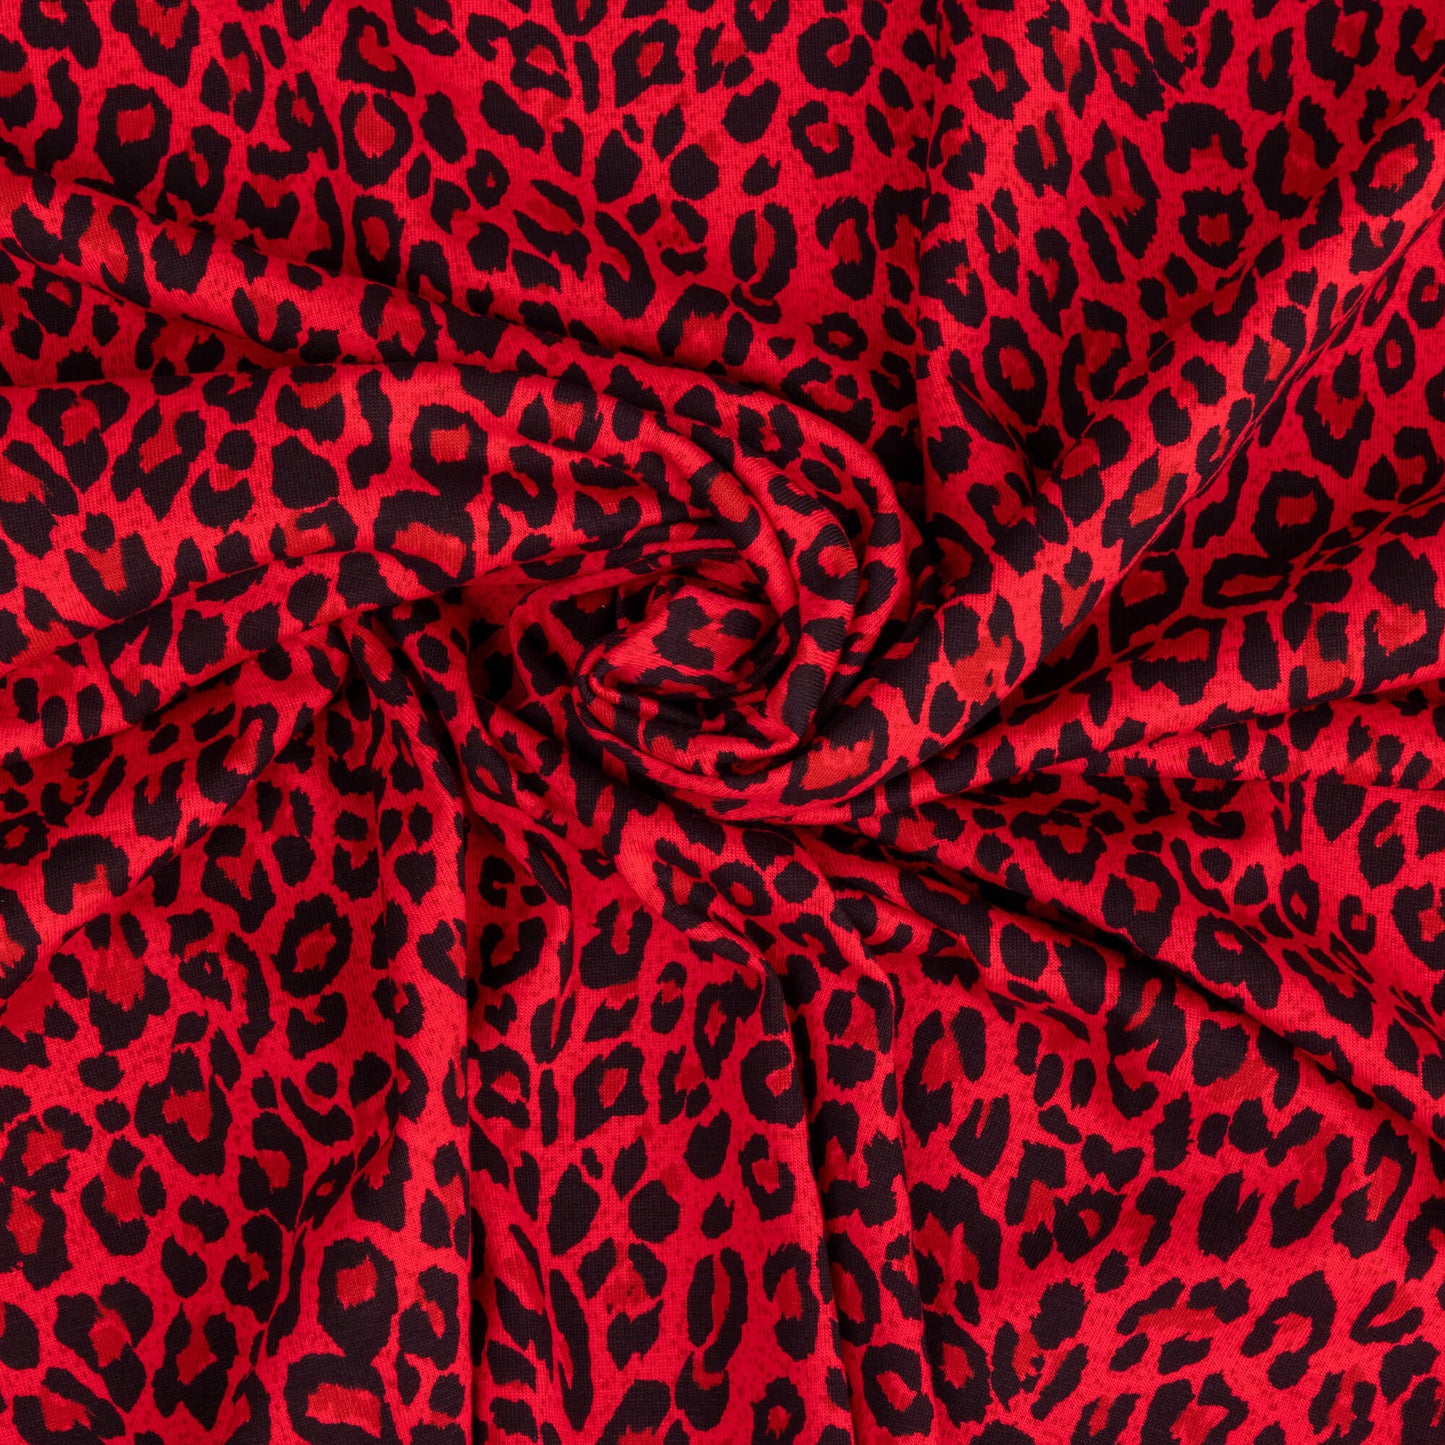 A swirl of bright red and black leopard print fabric in a soft jersey t-shirt weight perfect for crafting